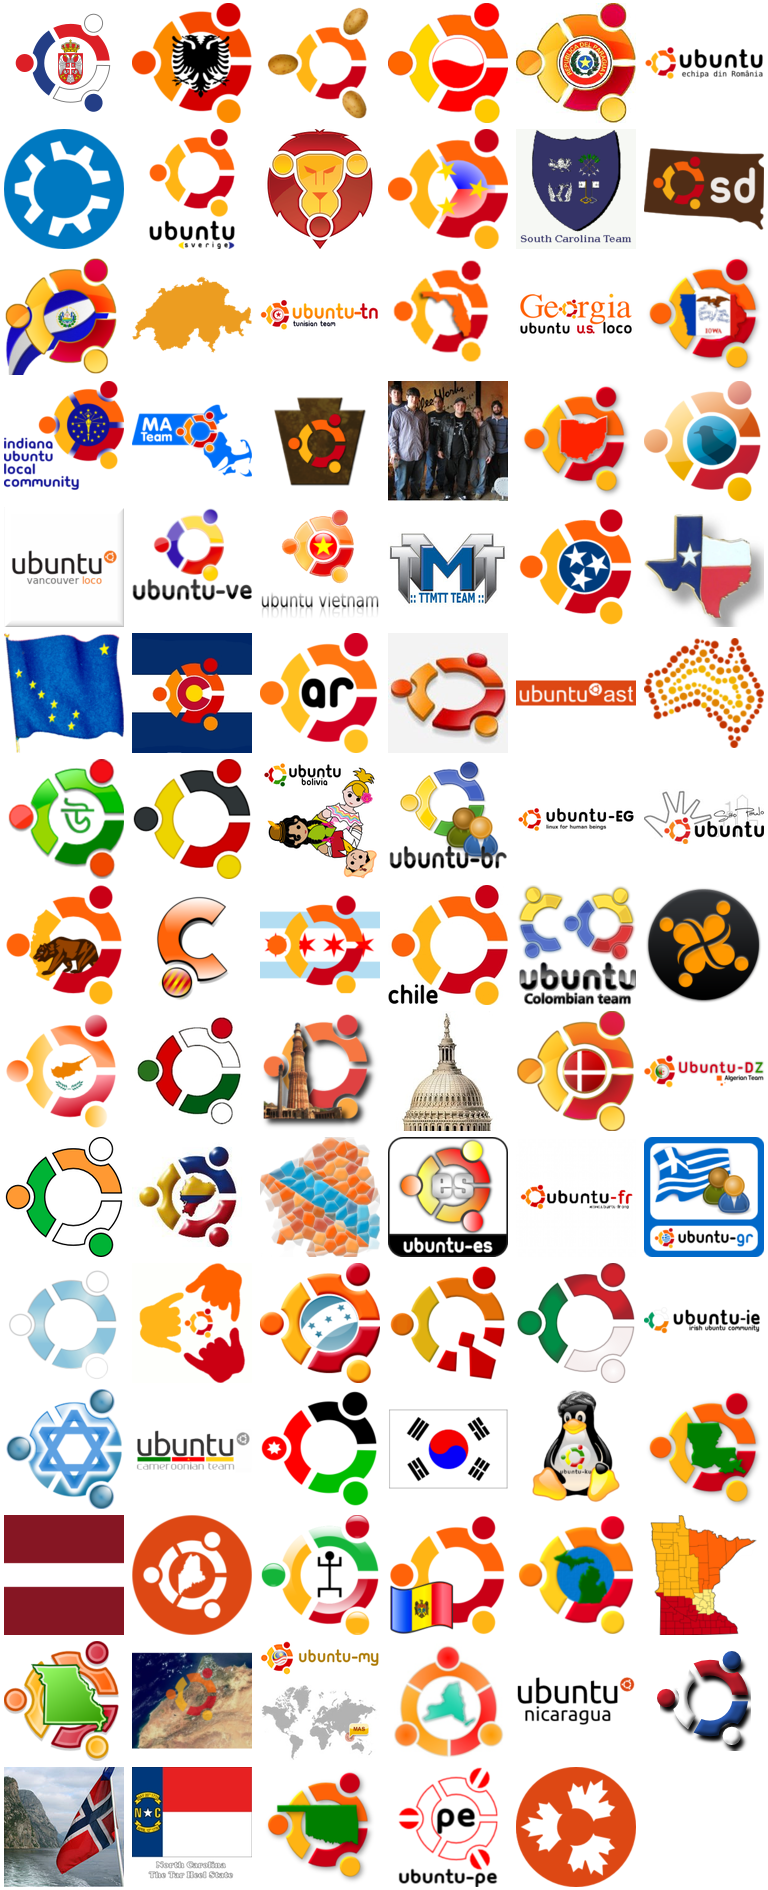 all-loco-logos_2010-10-23.png